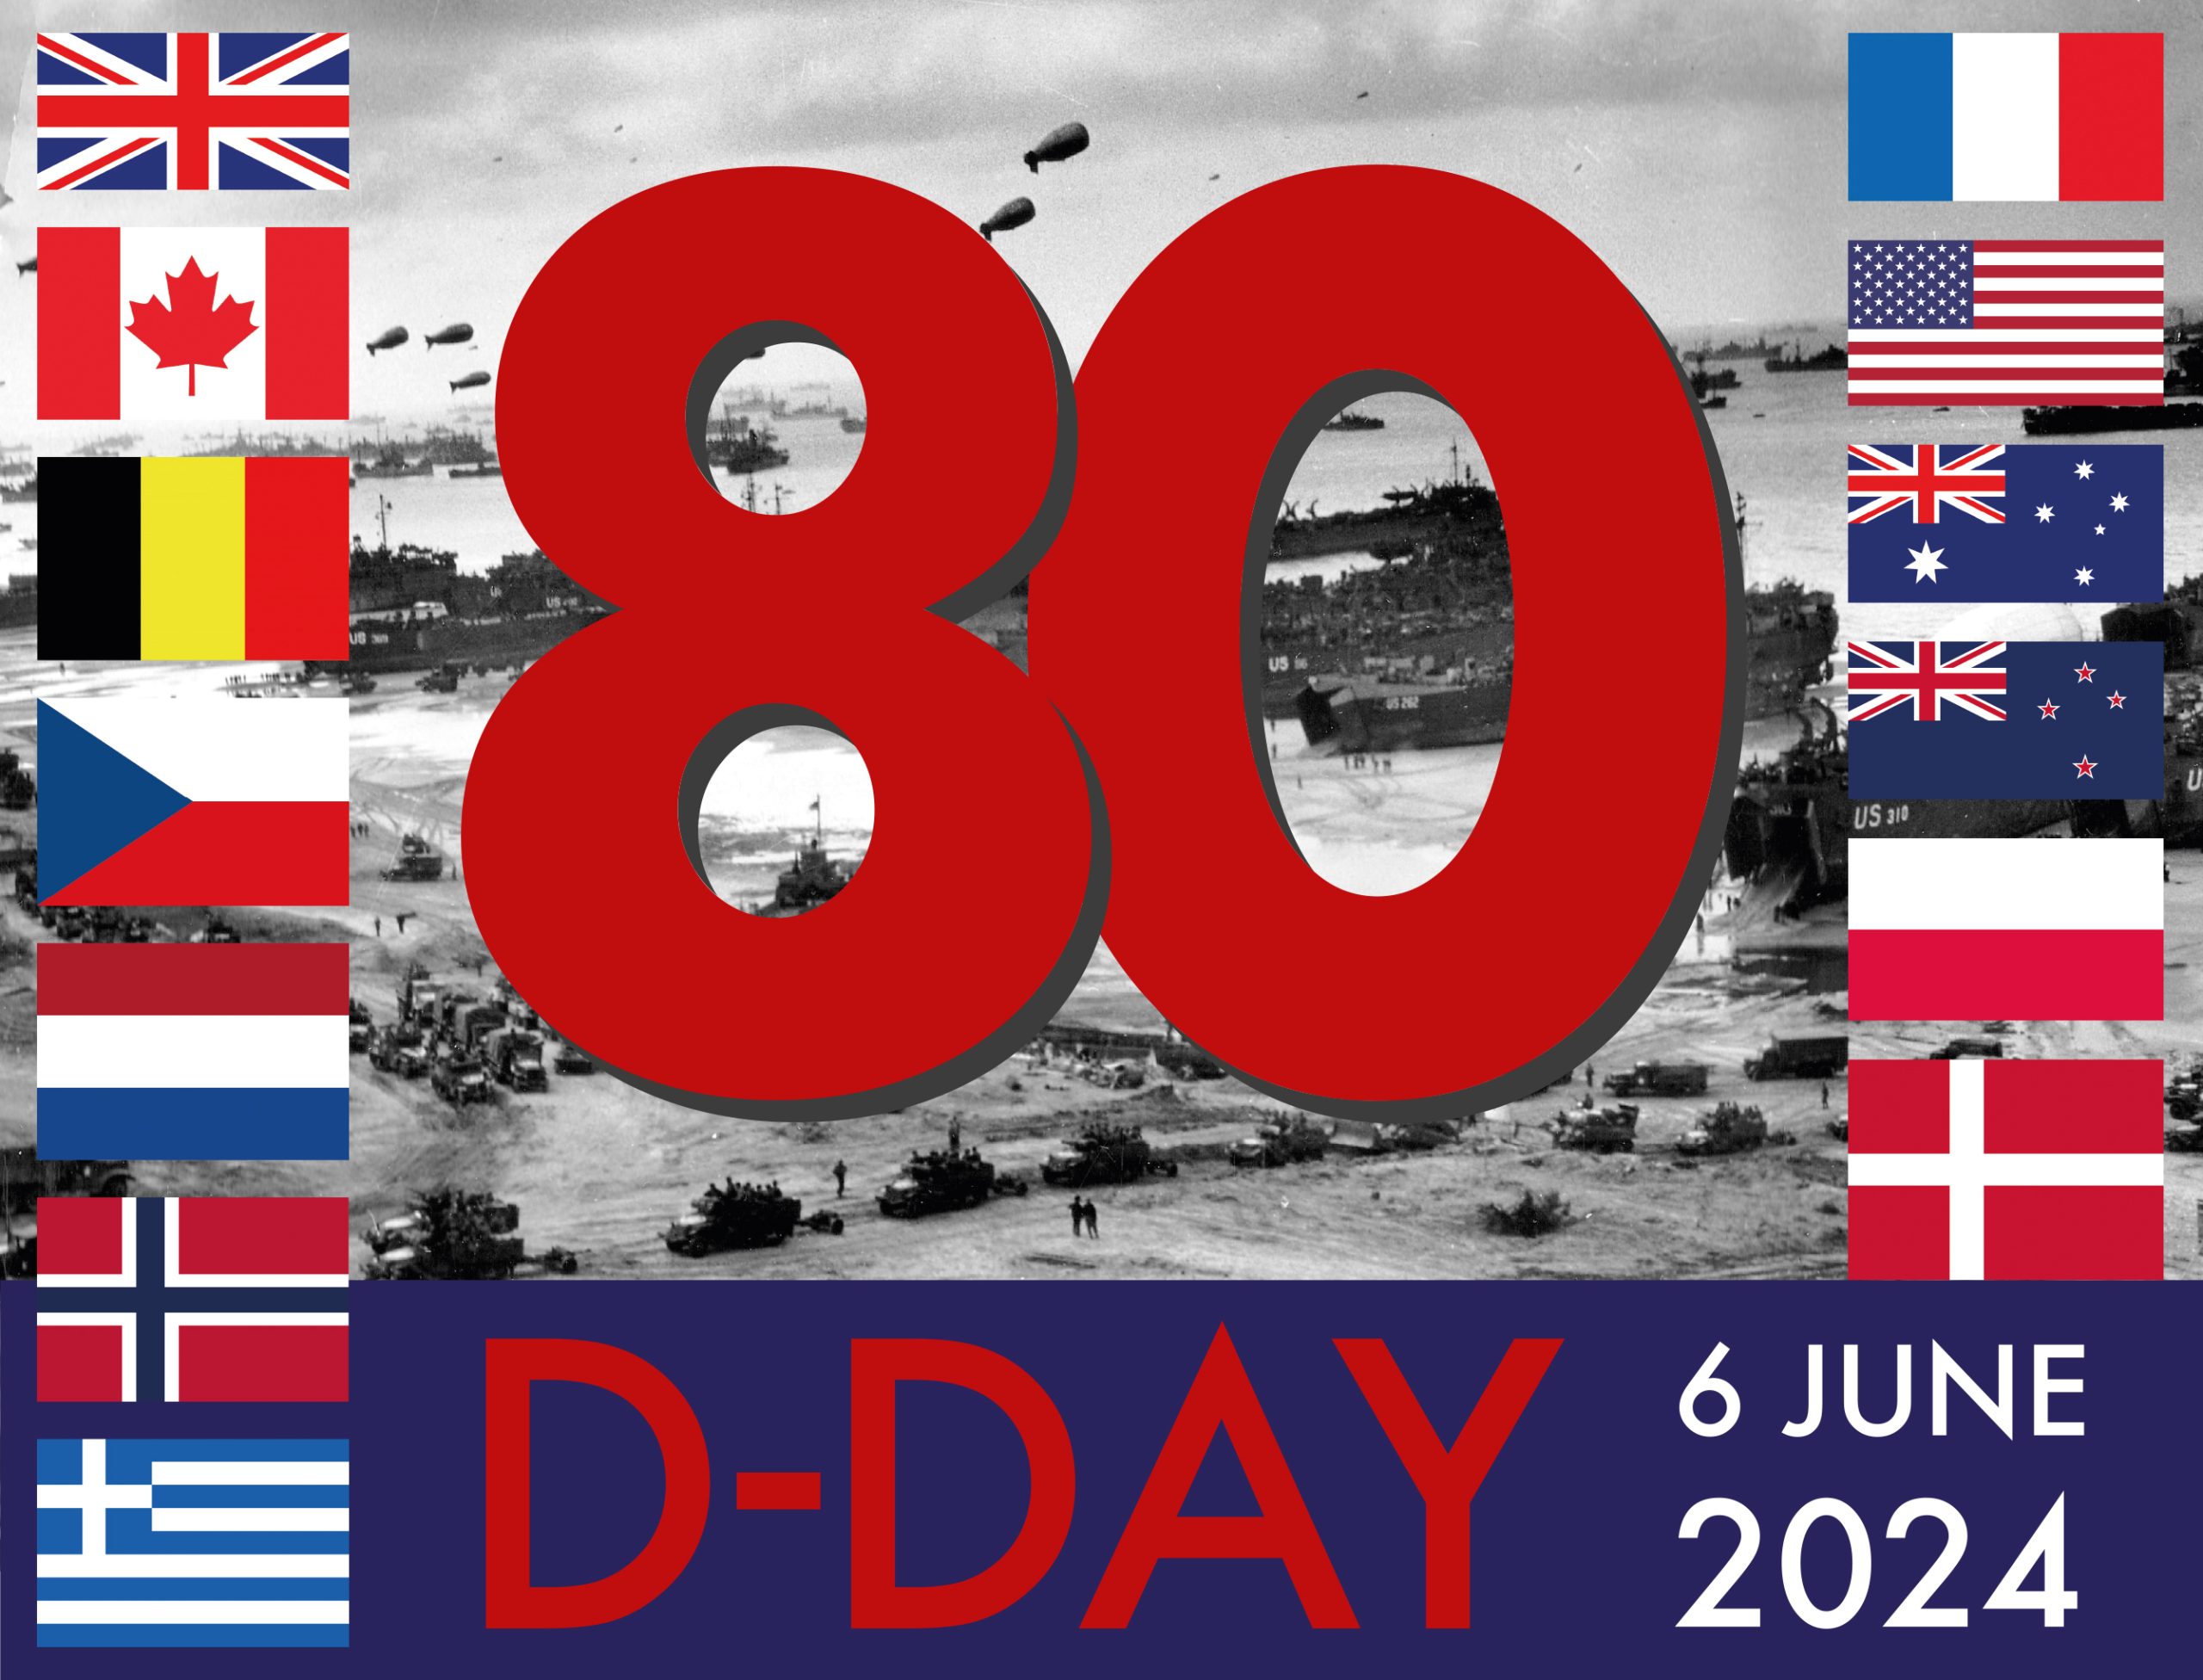 Send your photographs and drawings of D-day 80